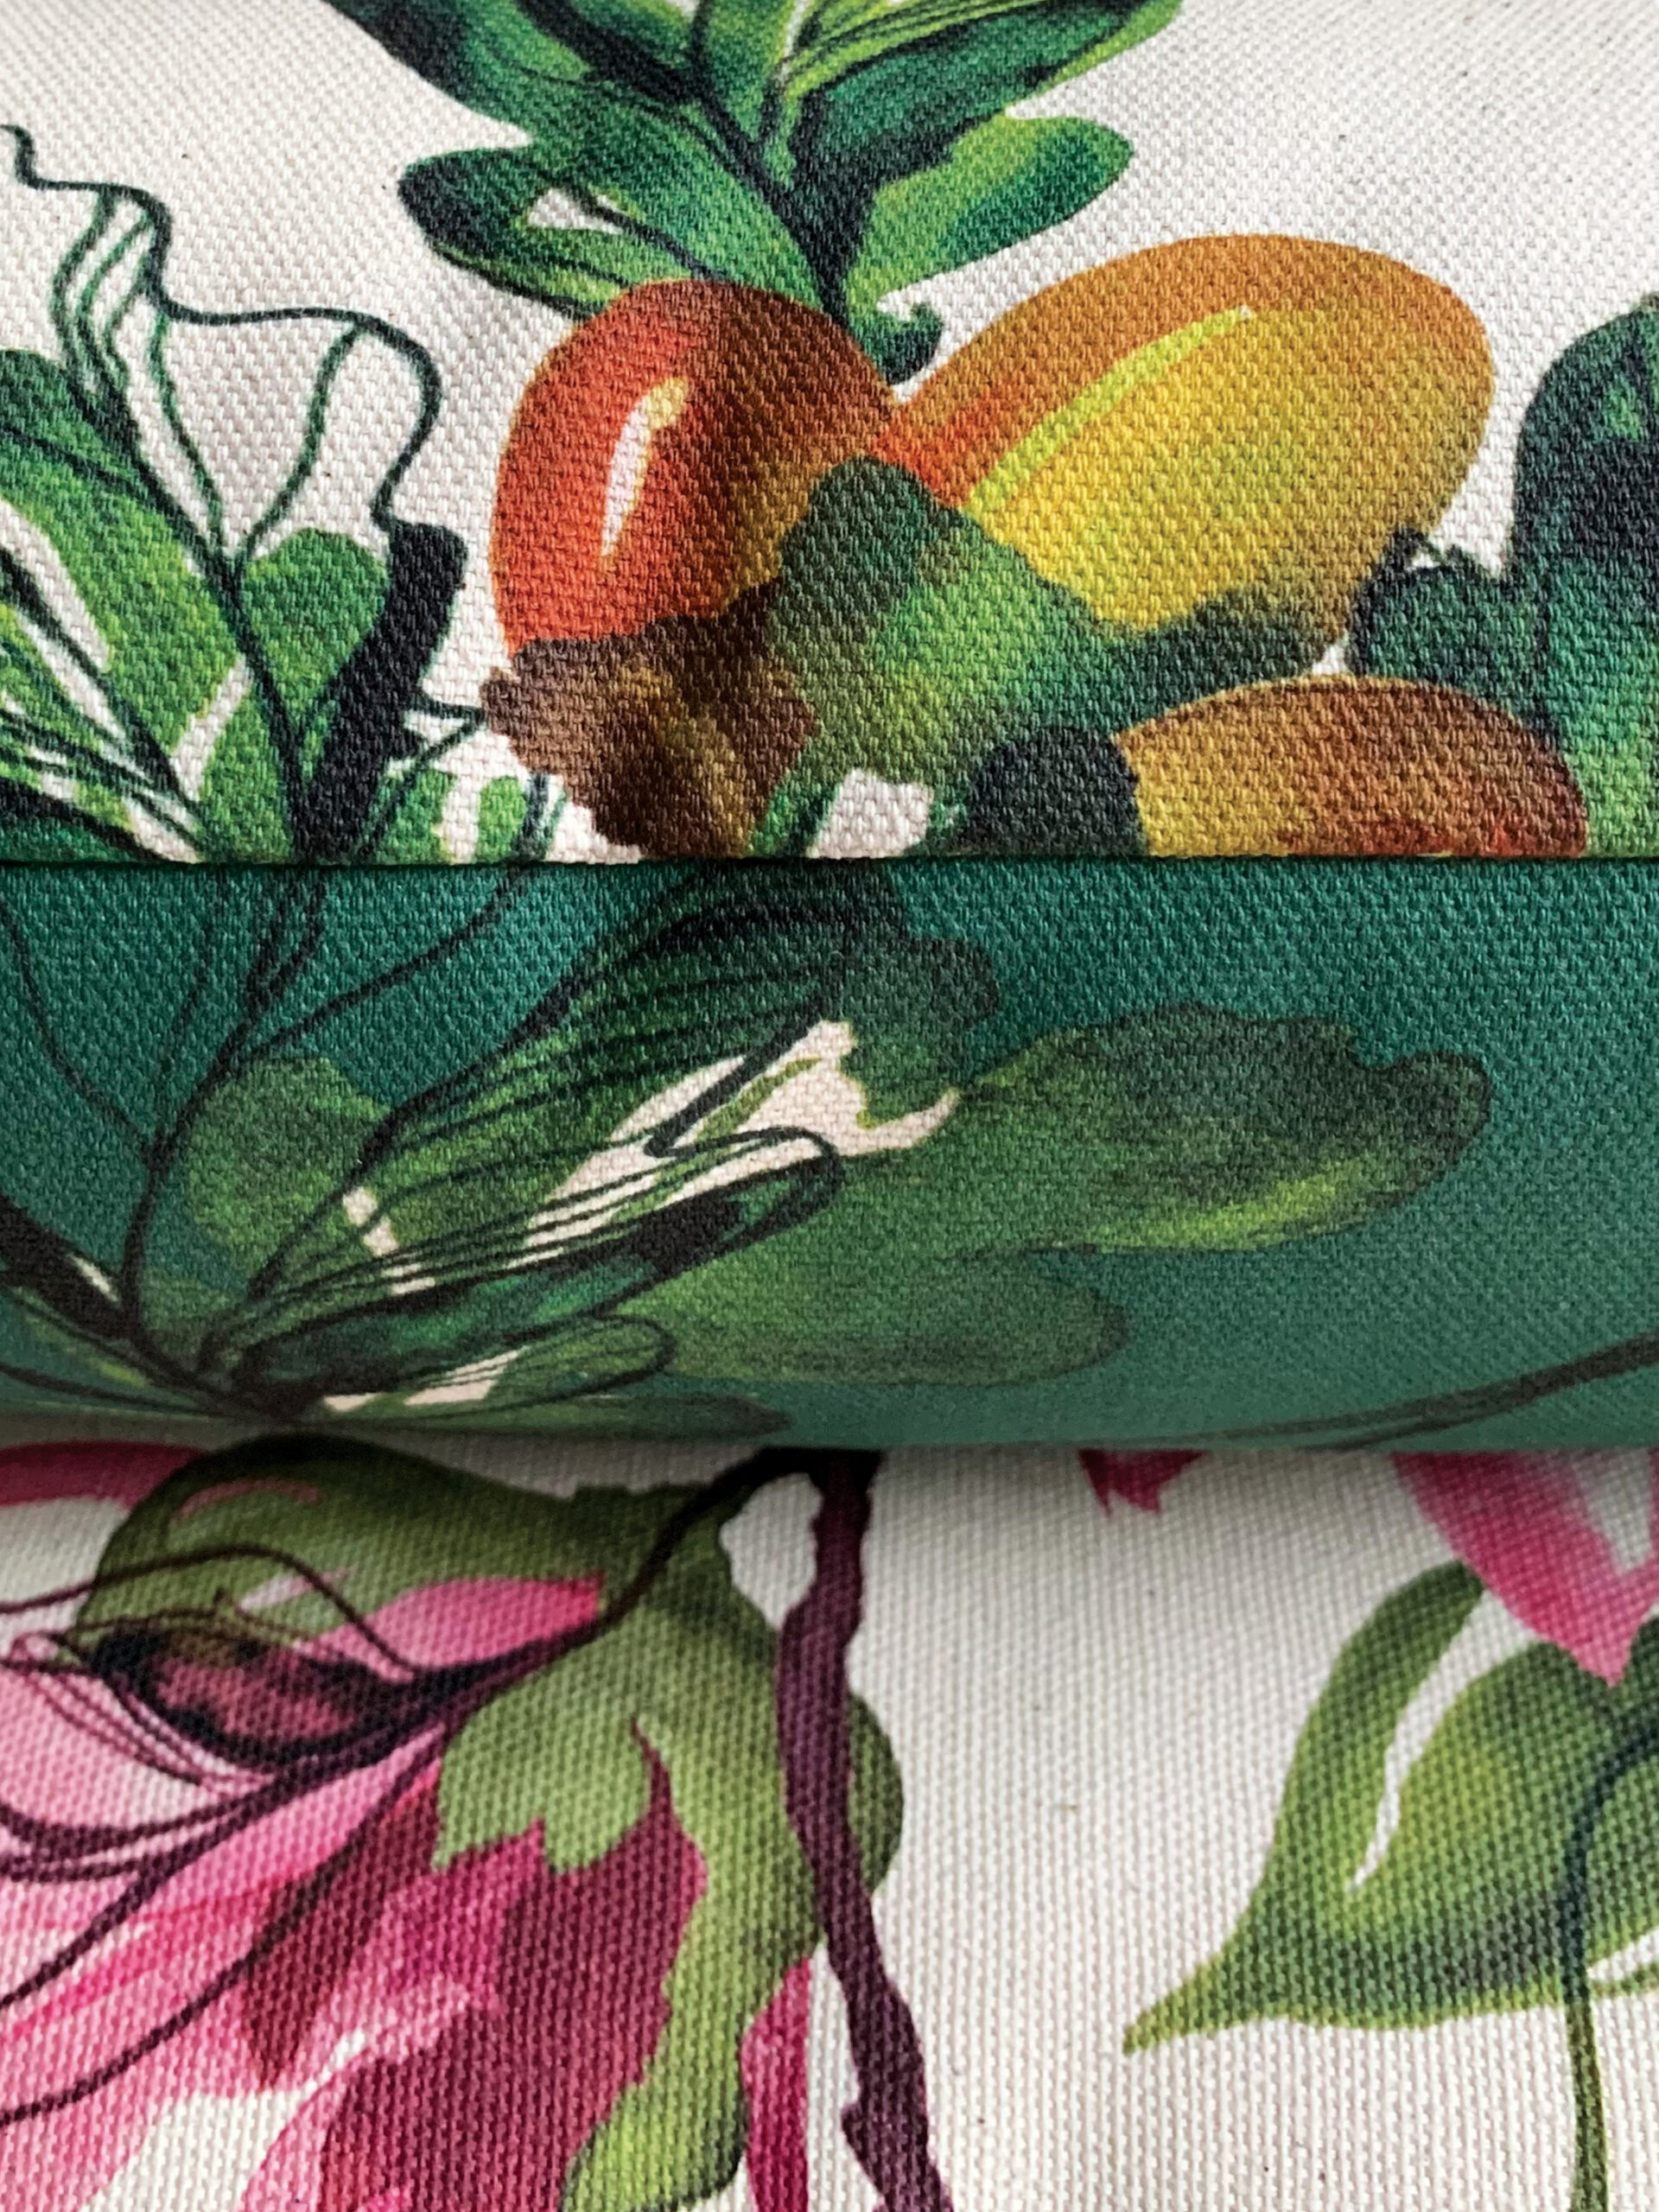 A close up of three different designs on fabric